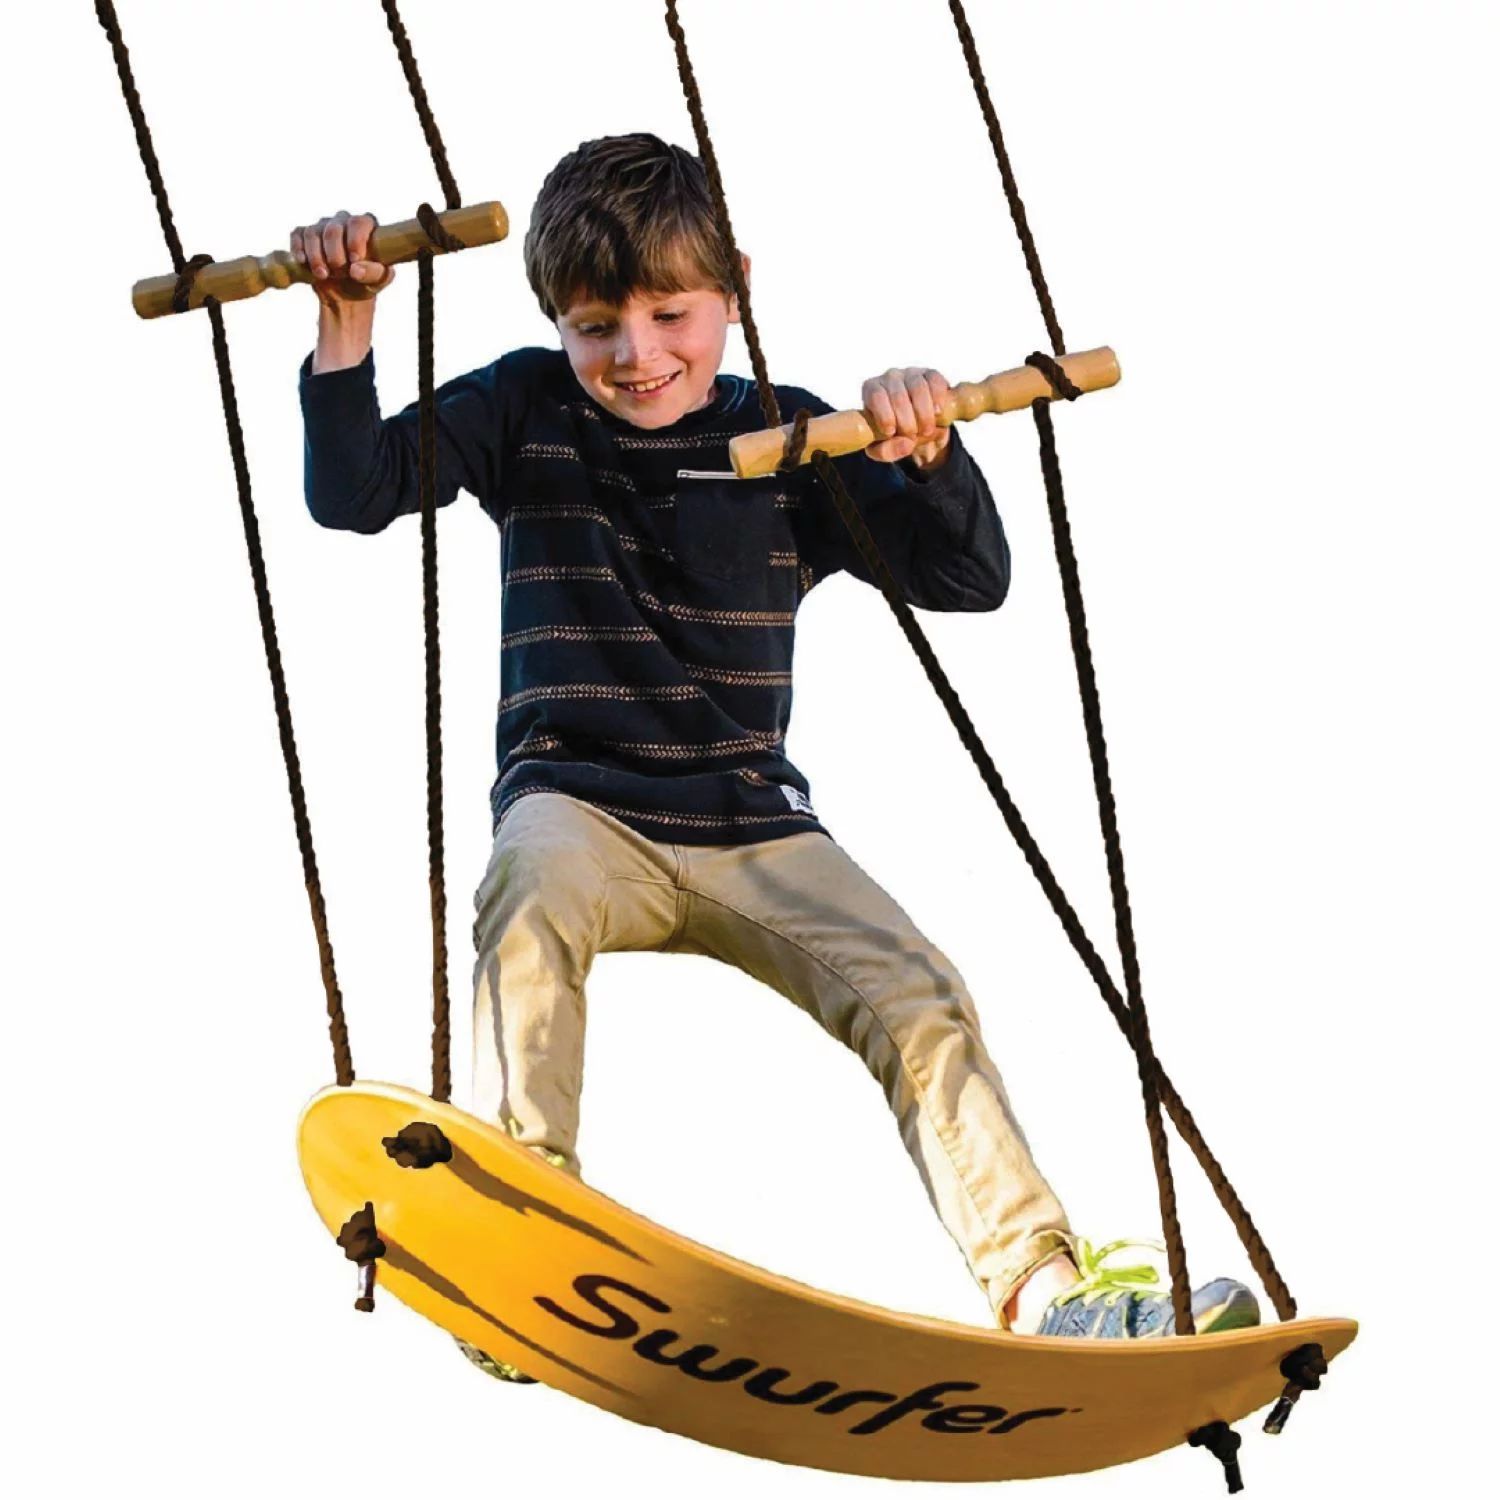 Swurfer The Original Stand up Surfing Swing, Wooden Outdoor Swing for Kids and Adults | Walmart (US)